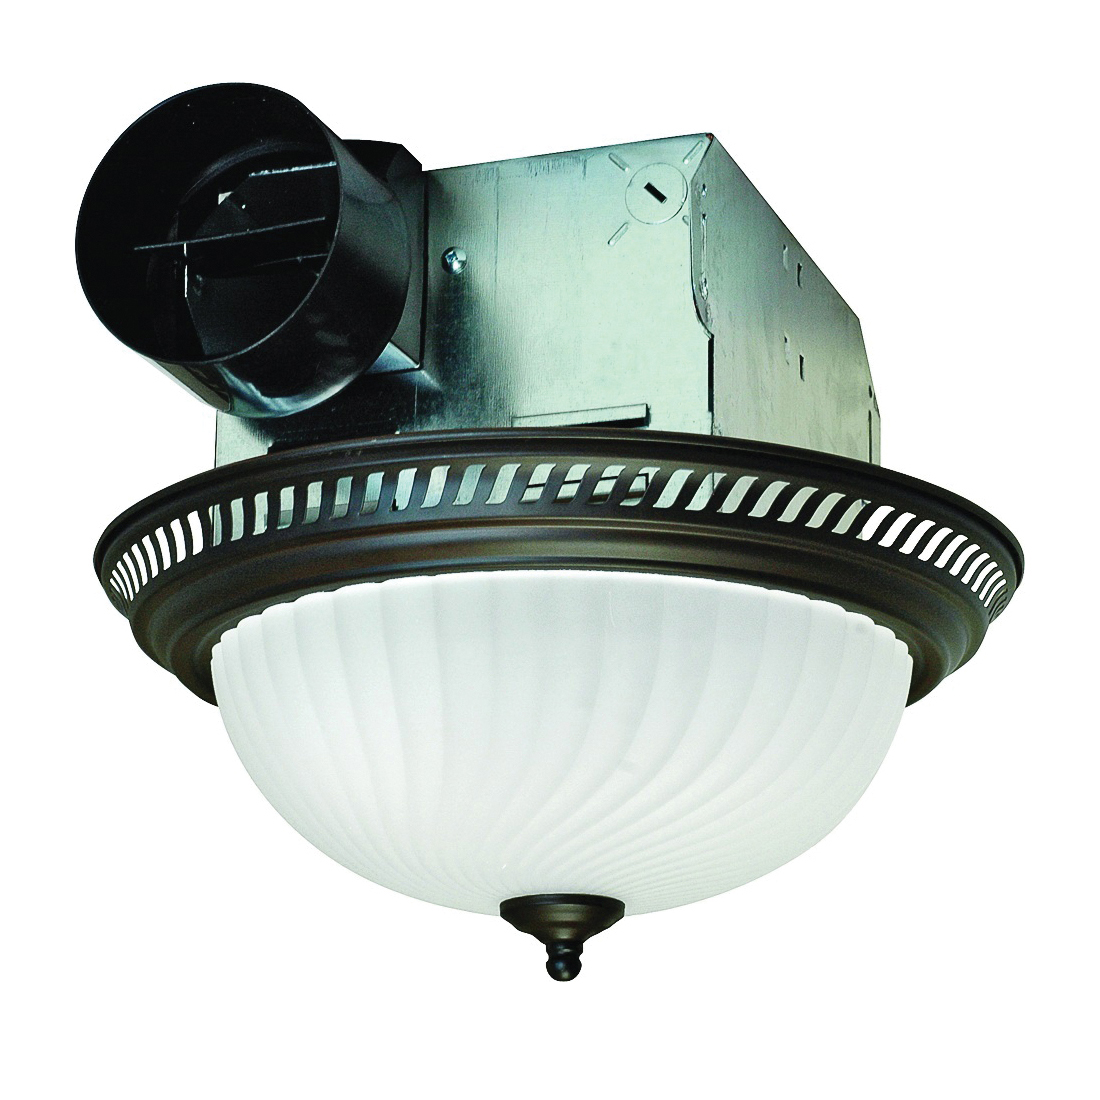 DRLC701 Exhaust Fan, 1.6 A, 120 V, 70 cfm Air, 4 Sones, CFL, Incandescent Lamp, 4 in Duct